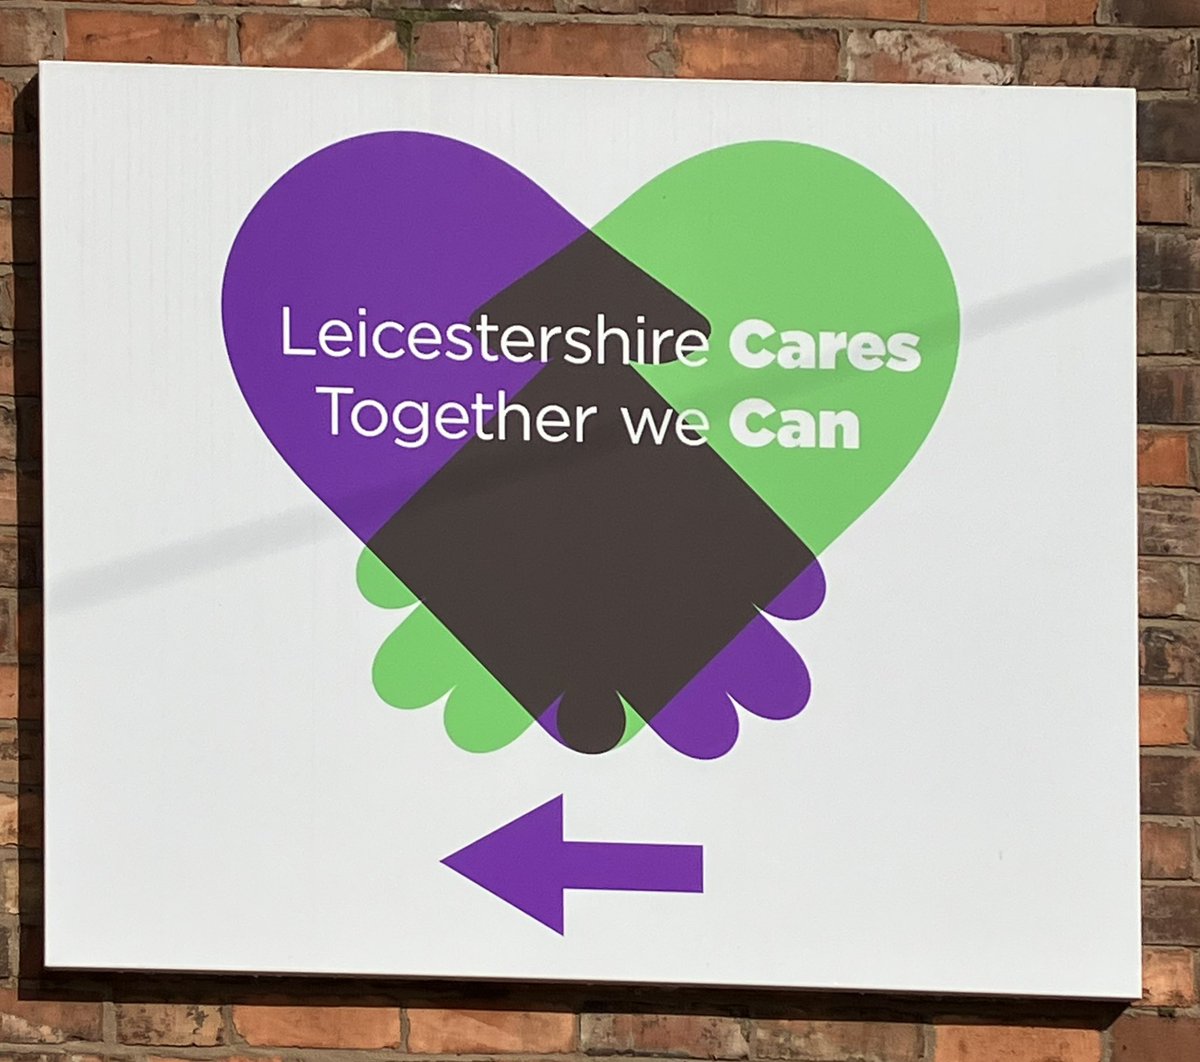 Always a pleasure to visit @LeicsCares where a warm welcome awaits. Great to work with(& inspire) the #PoweringUp group who are looking to campaign in Parliament about issues relating to #careleavers @YourUKParl